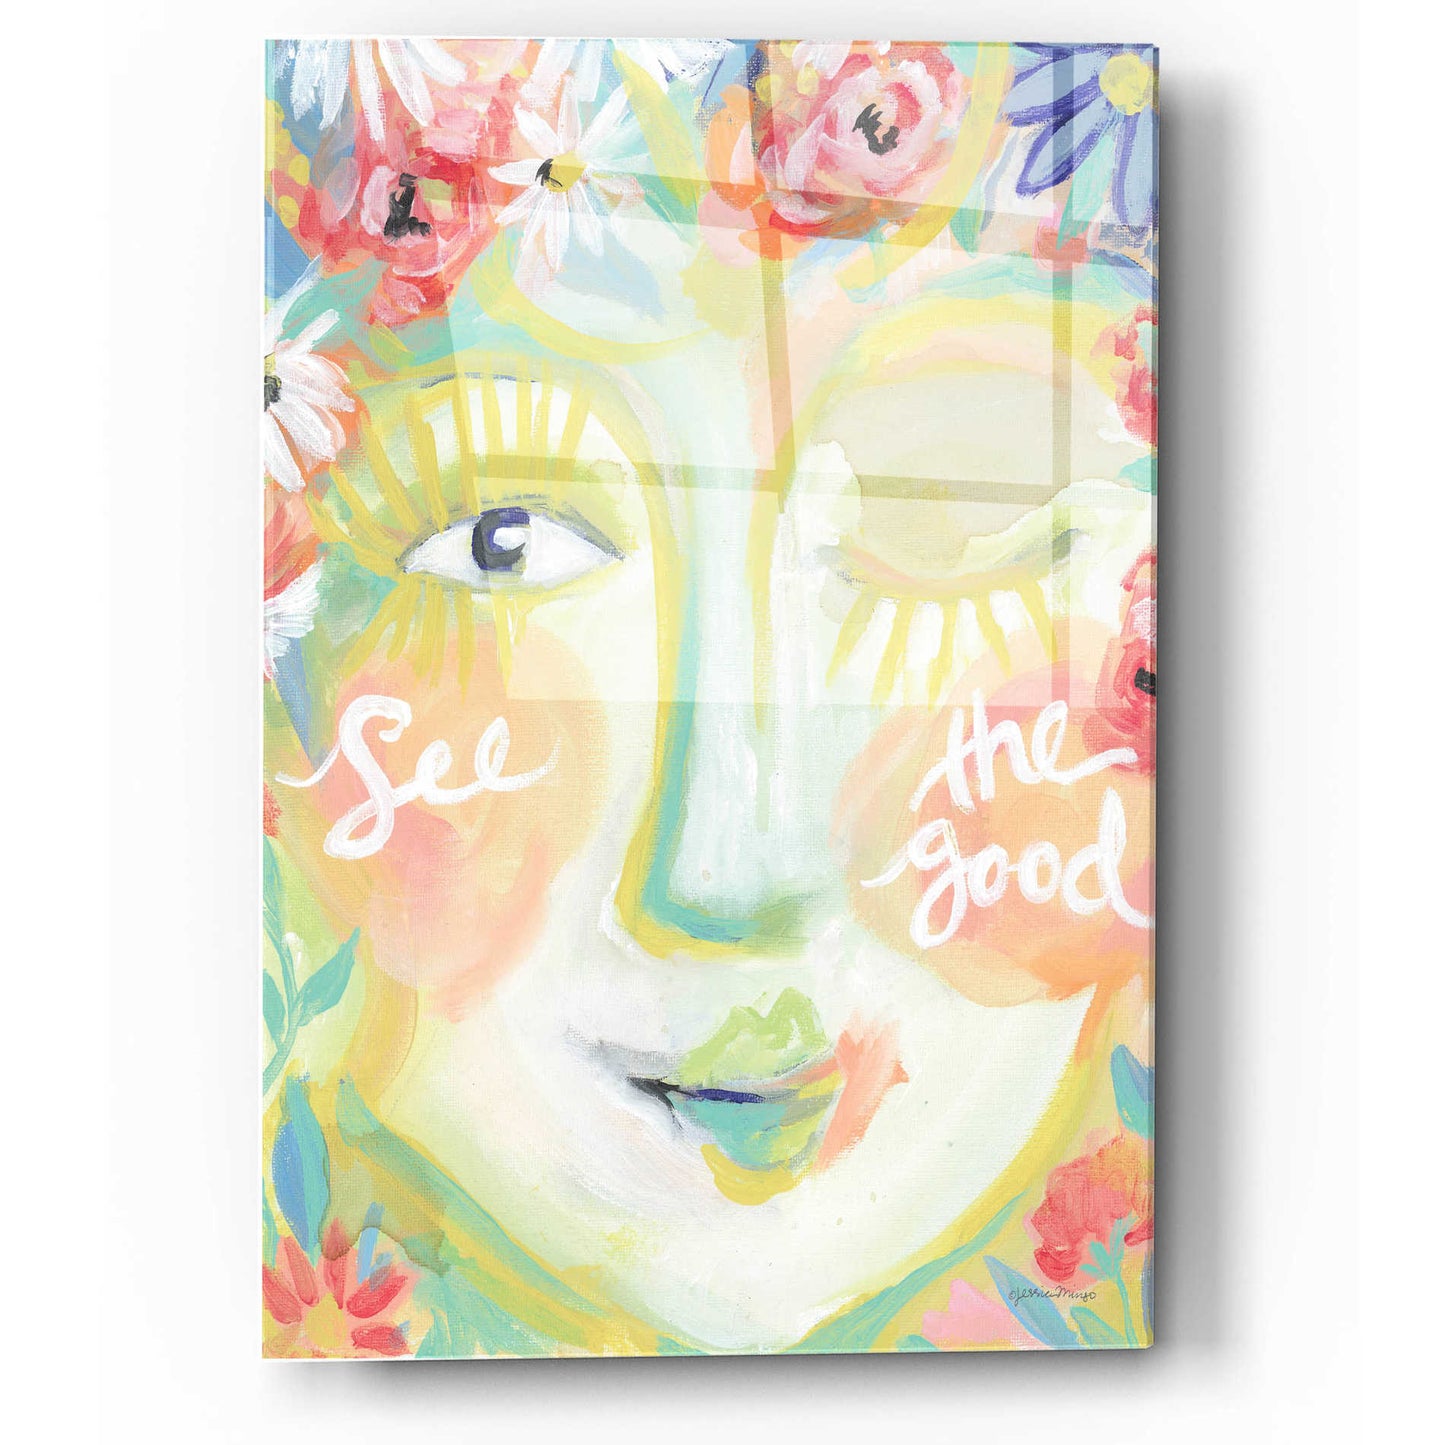 Epic Art 'See the Good' by Jessica Mingo, Acrylic Glass Wall Art